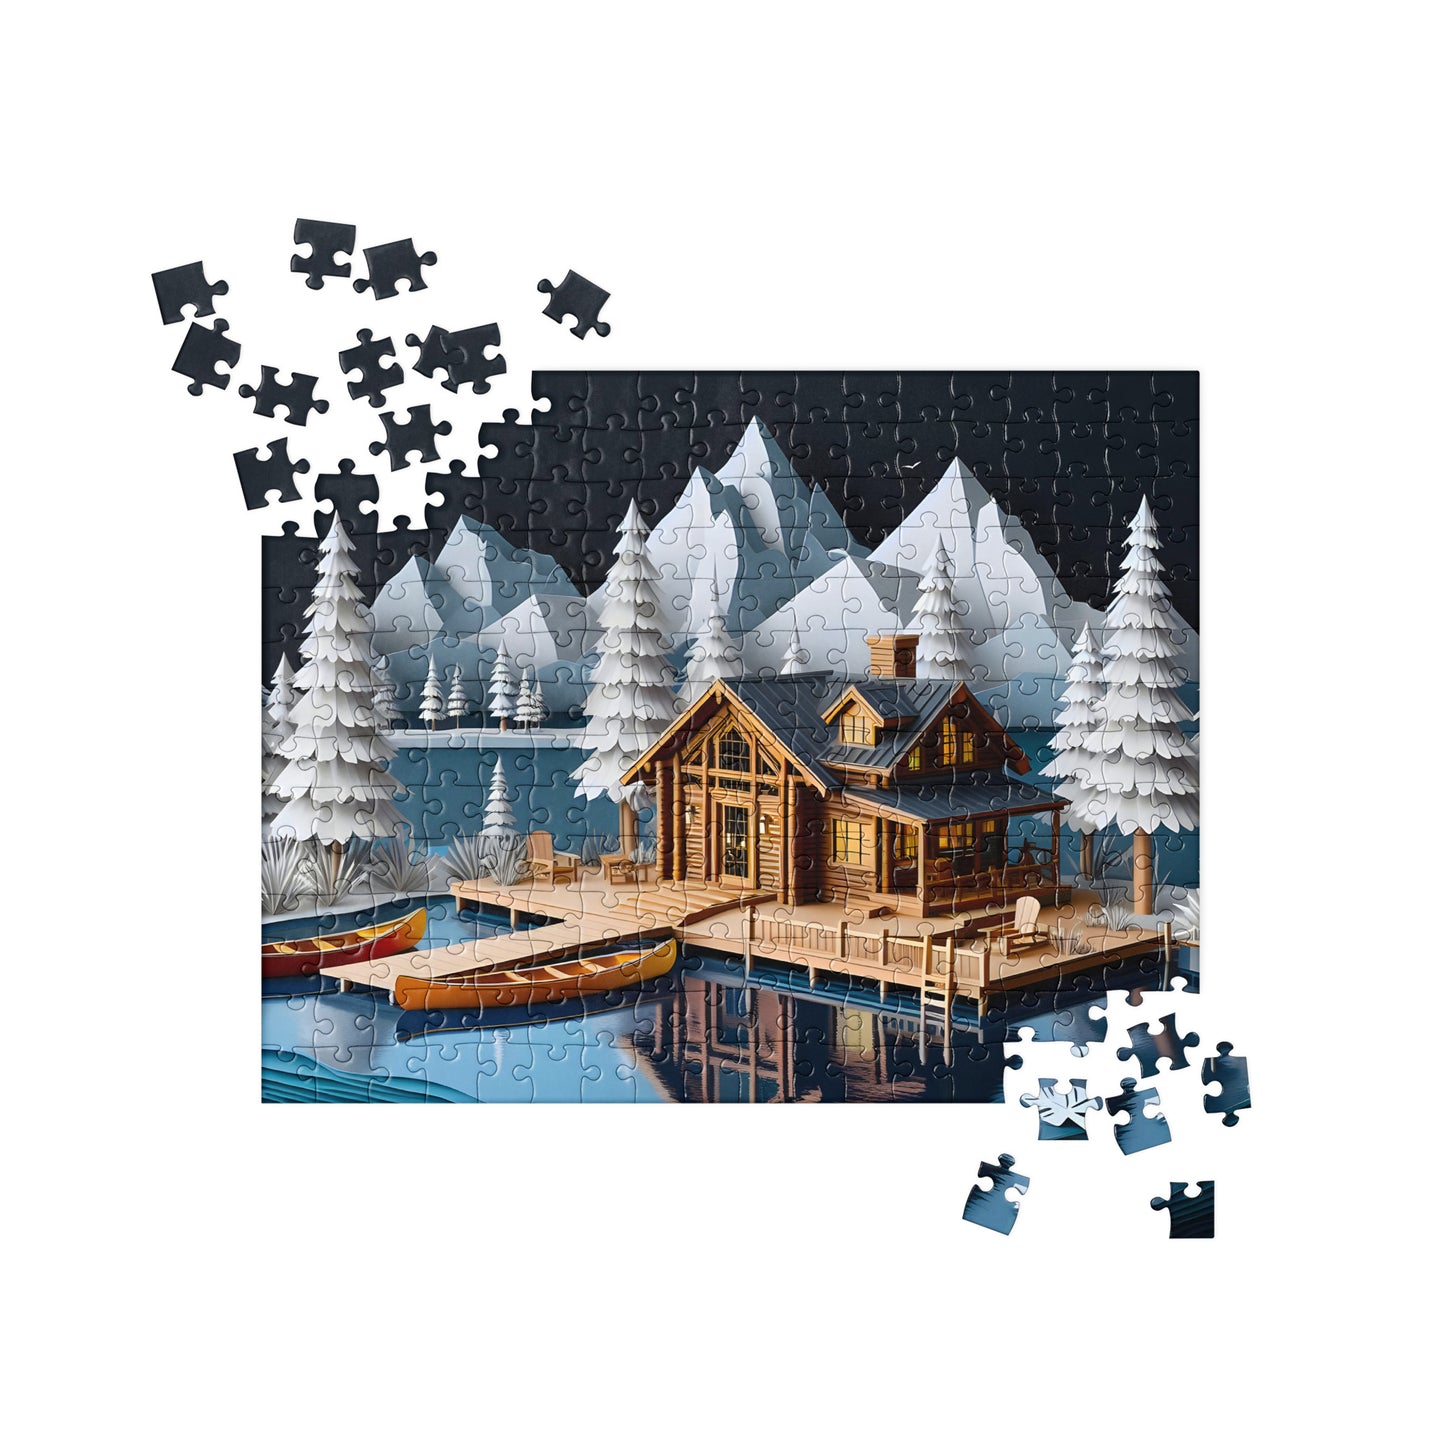 3D Wooden Cabin - Jigsaw Puzzle #7